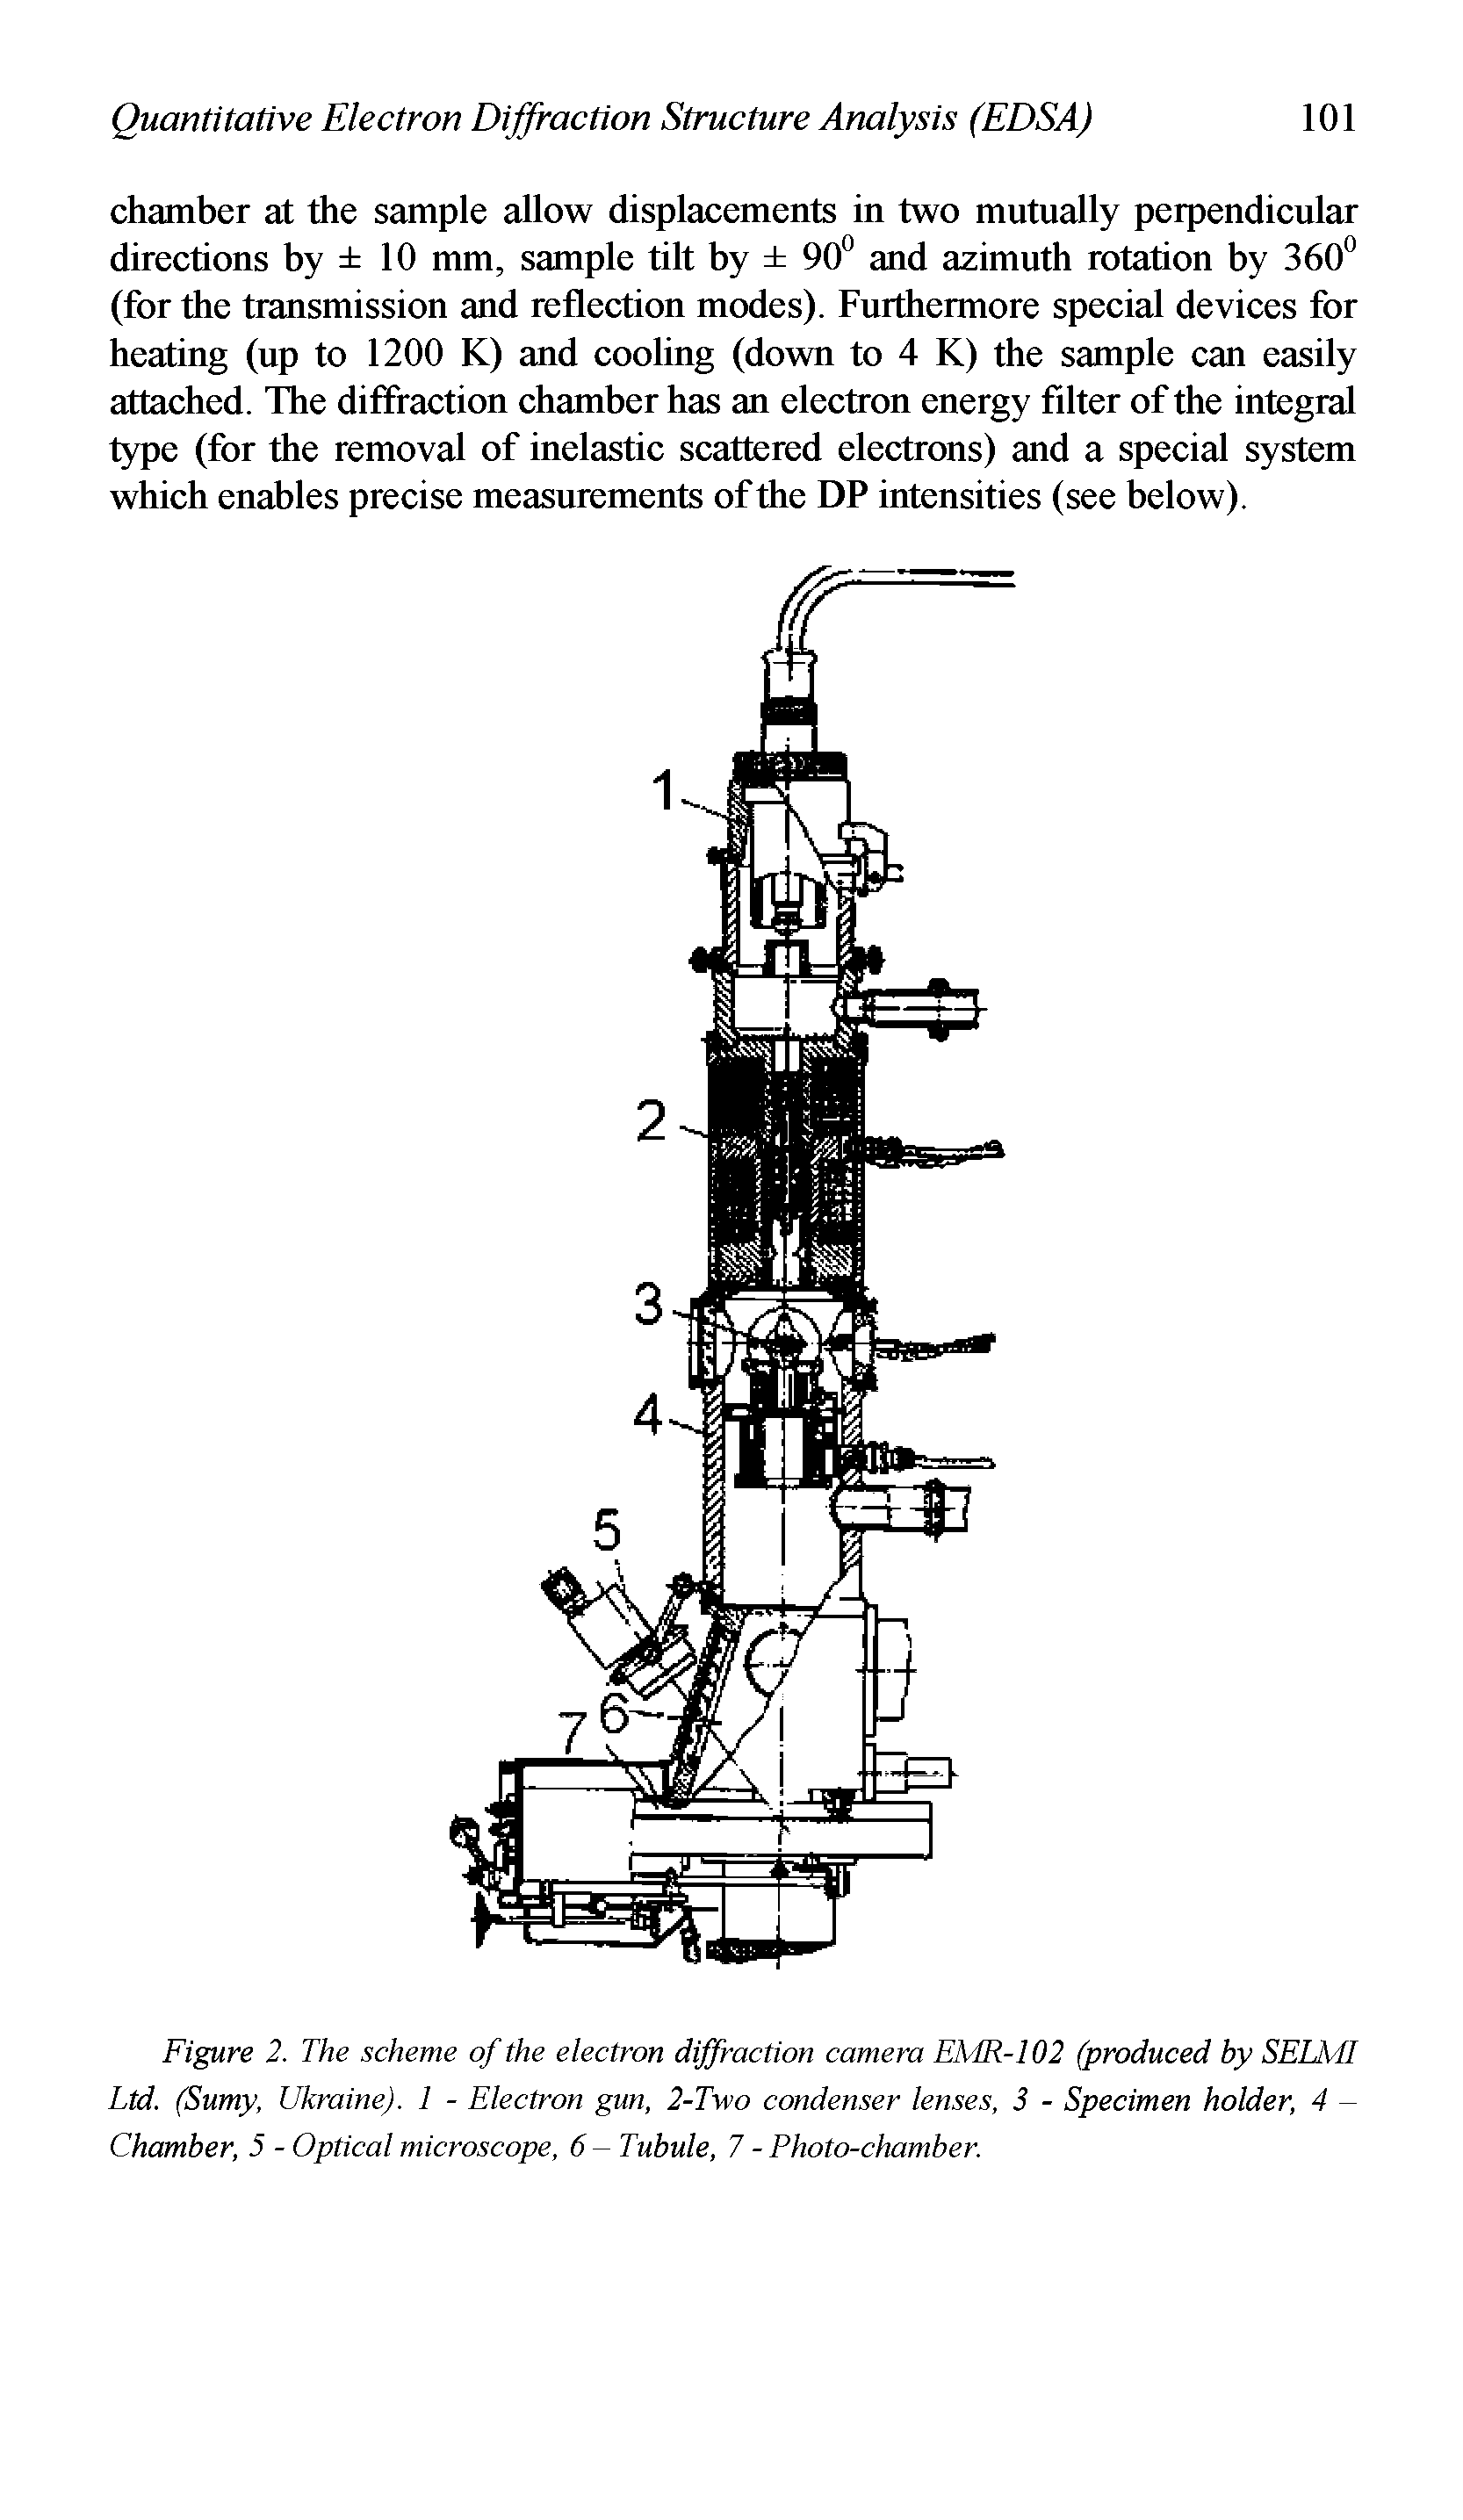 Figure 2. The scheme of the electron diffraction camera EMR-102 (produced by SELMI Ltd. (Sumy, Ukraine). 1 - Electron gun, 2-Two condenser lenses, 3 - Specimen holder, 4 -Chamber, 5 - Optical microscope, 6- Tubule, 7 - Photo-chamber.